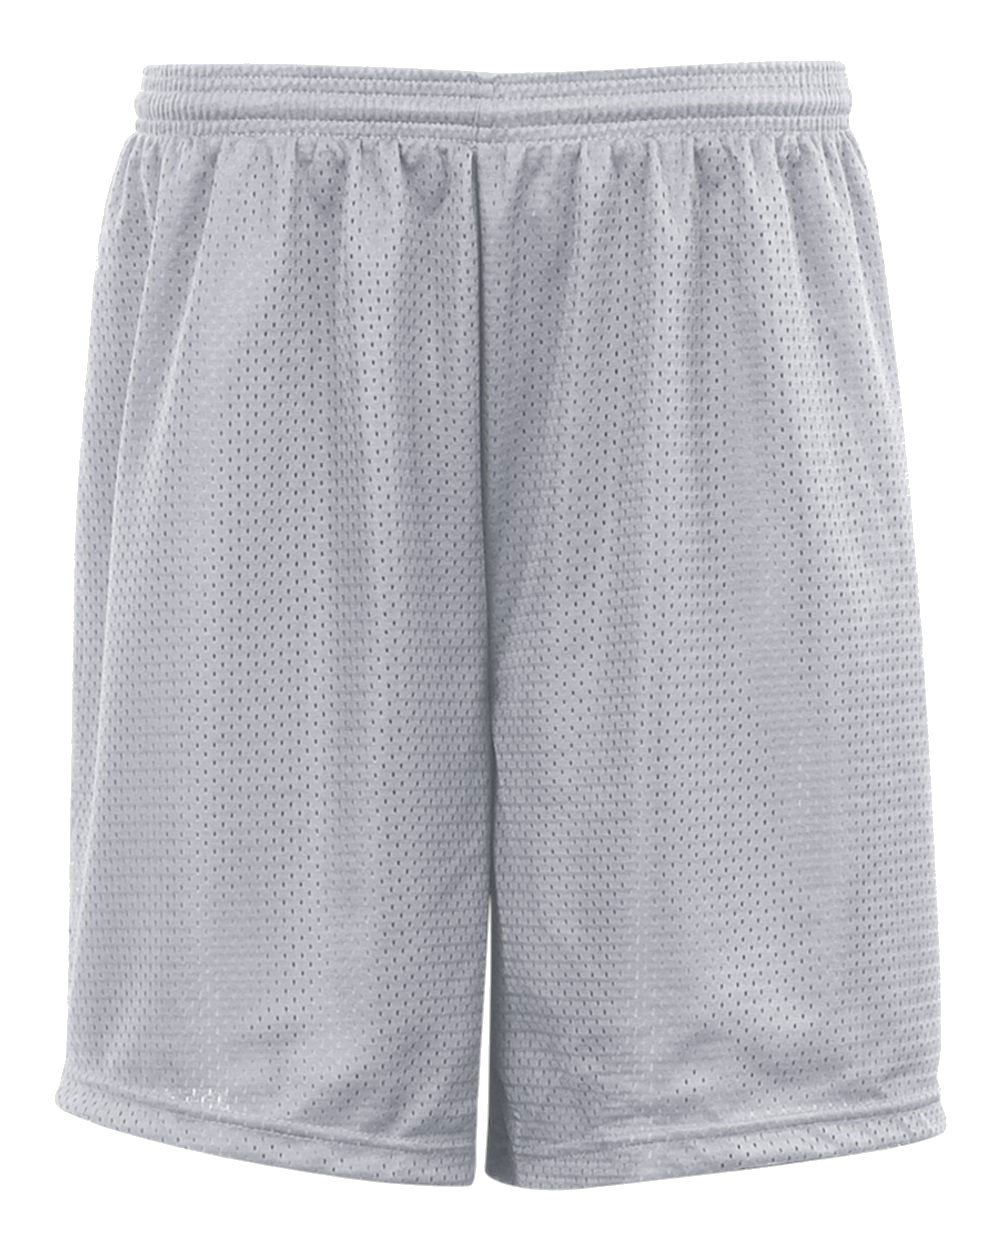 Badger Sport® 220700 Mesh/Tricot Youth 6" Short